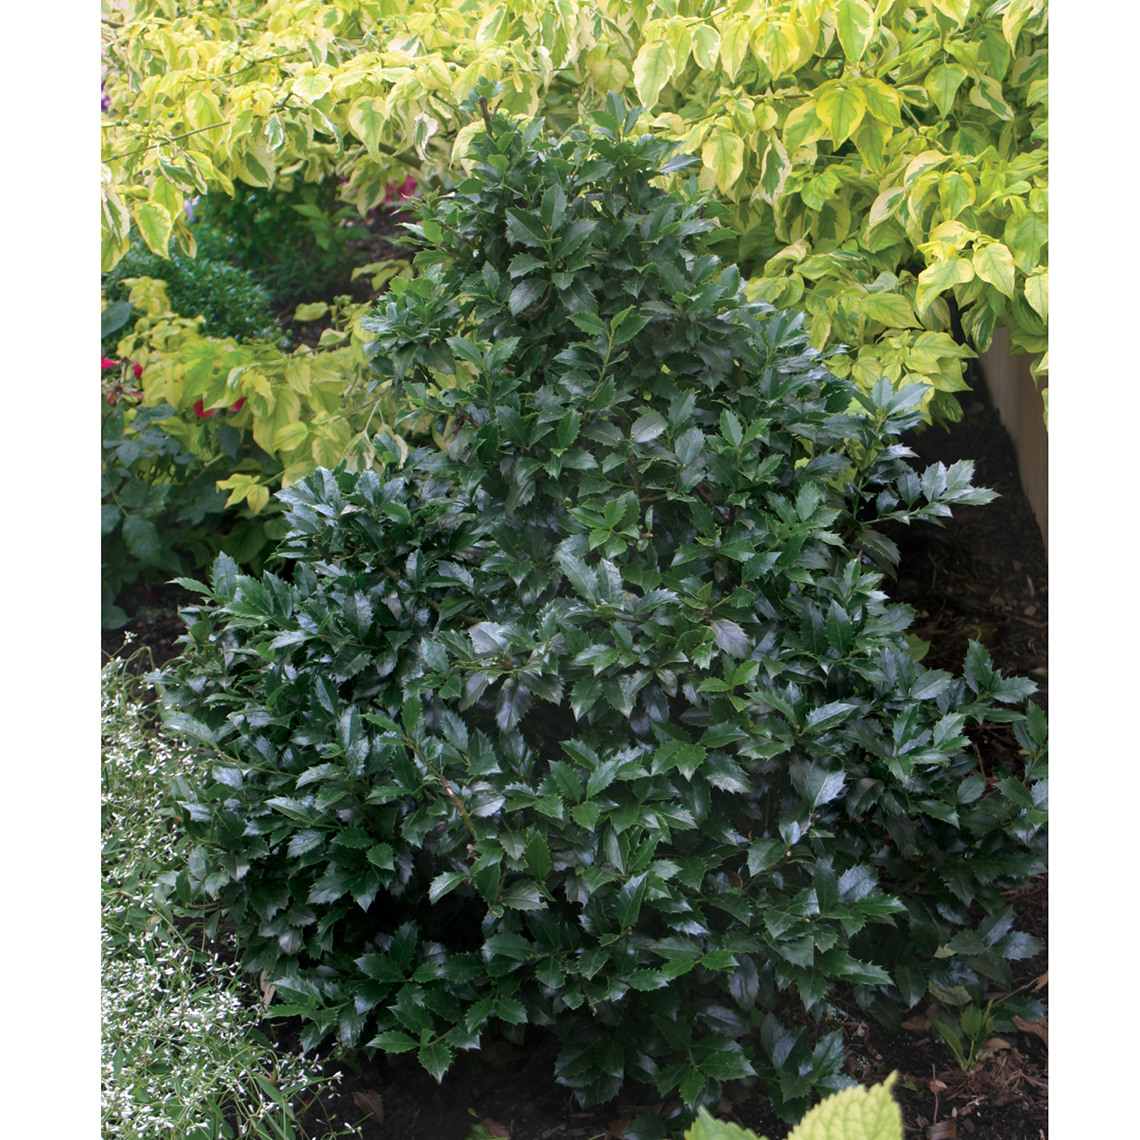 Dark leafed Castle Spire blue holly planted in front of yellow variegated tree